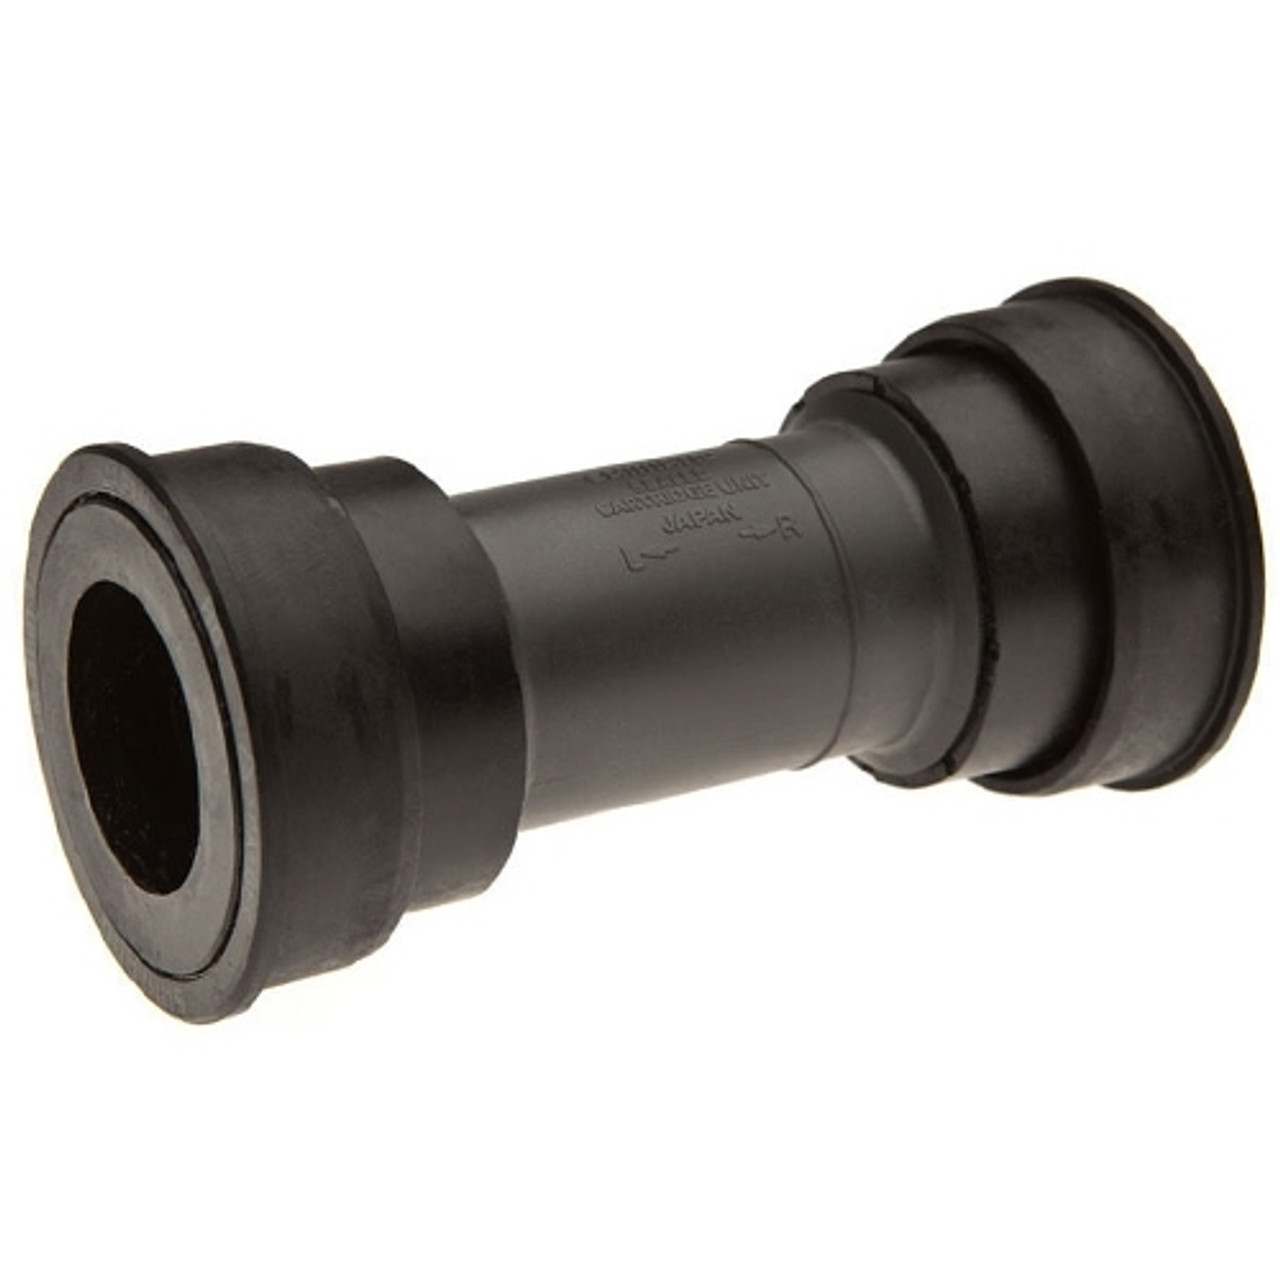 Shimano Dura Ace Press Fit Bottom Bracket Compatible With 86.5mm Shells